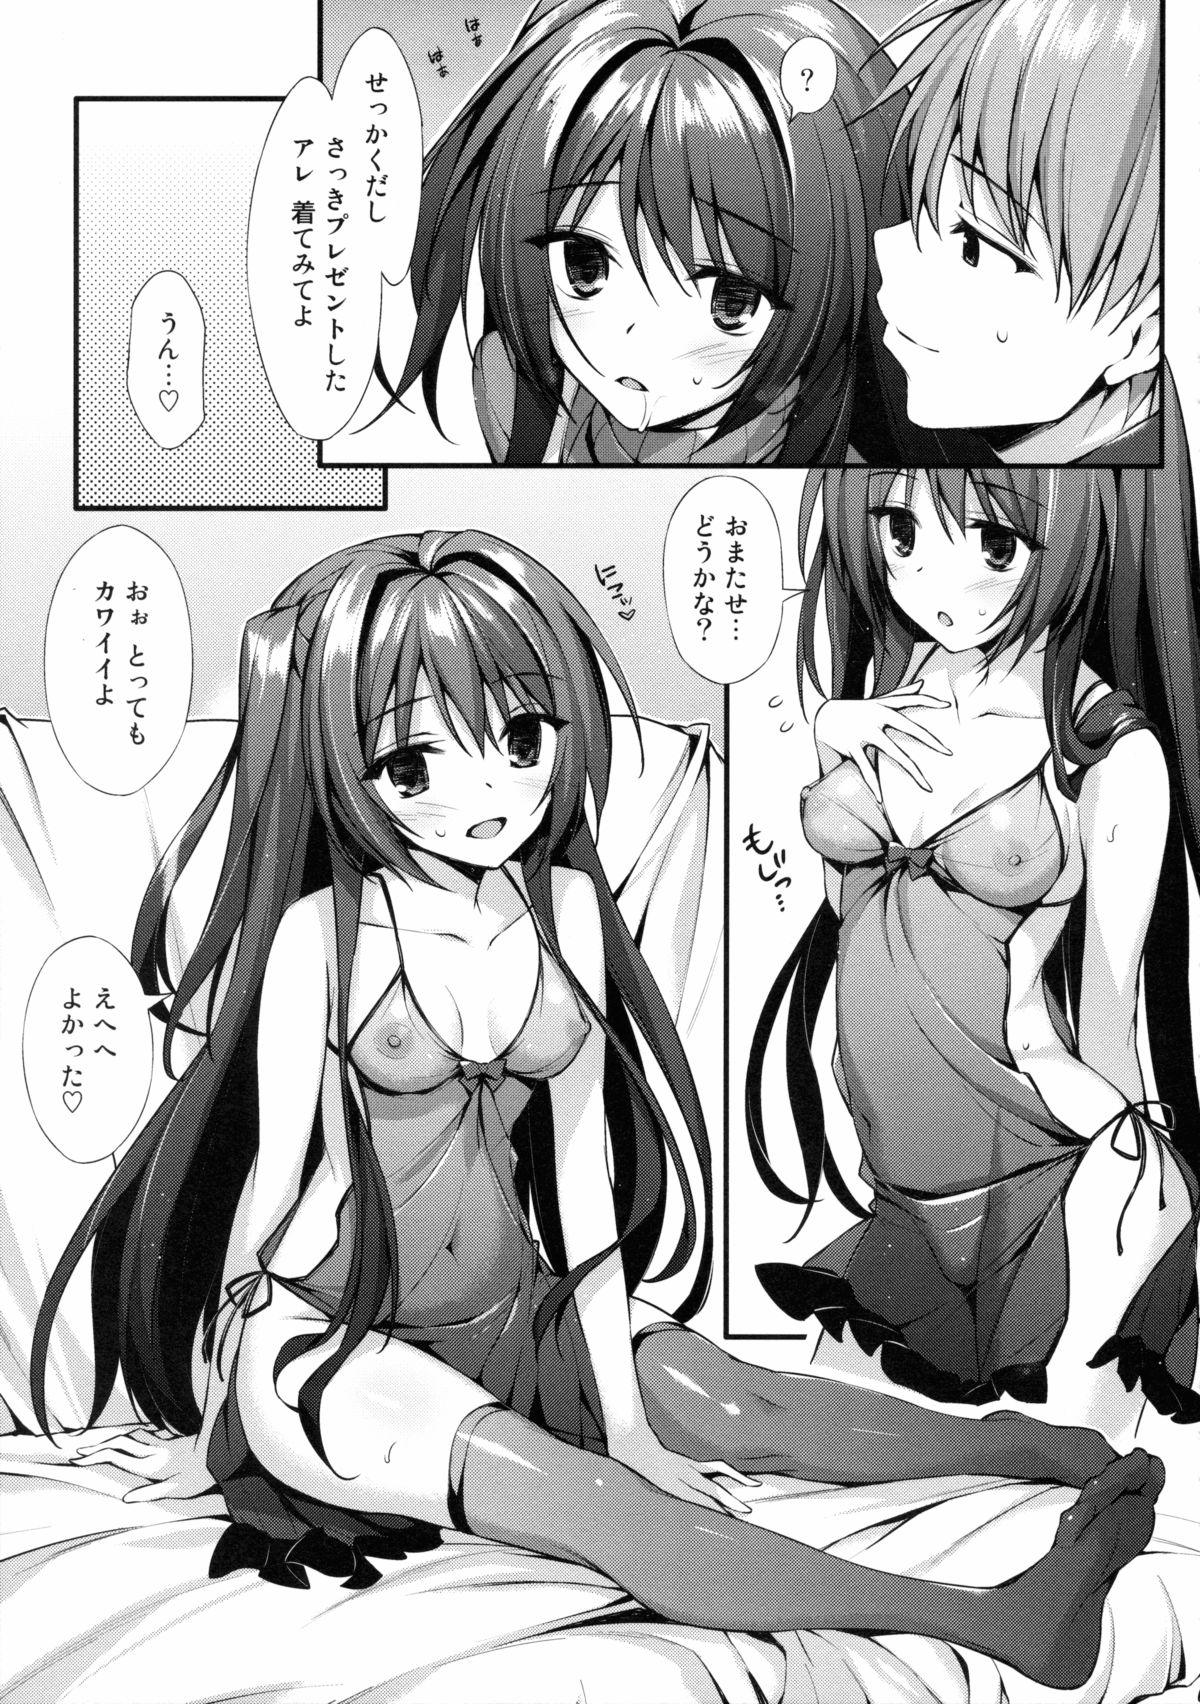 Booty (C89) [P:P (Oryou)] Onii-chan Senyou Makoto-chan (Tokyo 7th Sisters) - Tokyo 7th sisters Jerking Off - Page 12